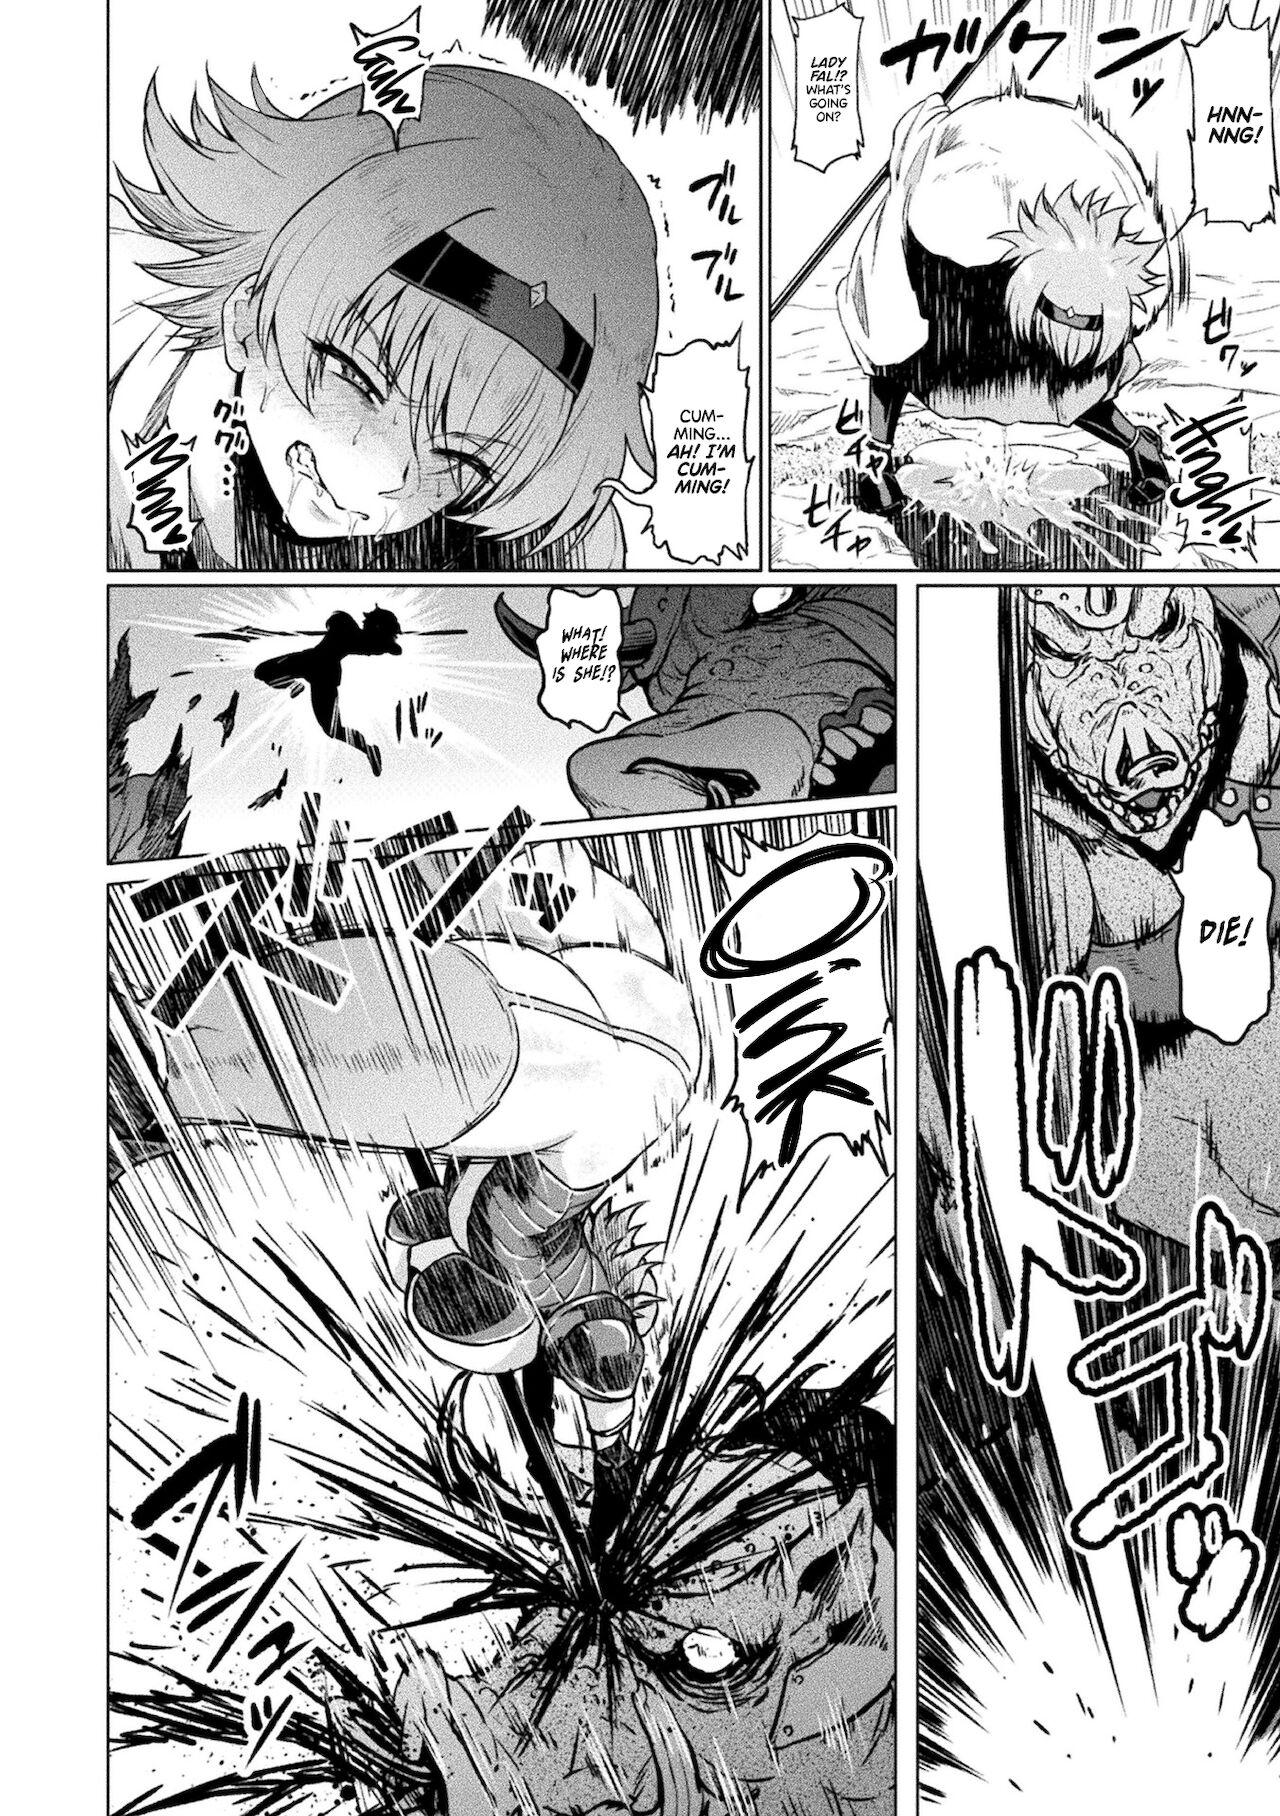 Funny Faru to Noroi no Soubi | Fal and the Cursed Armor Teenfuns - Page 6